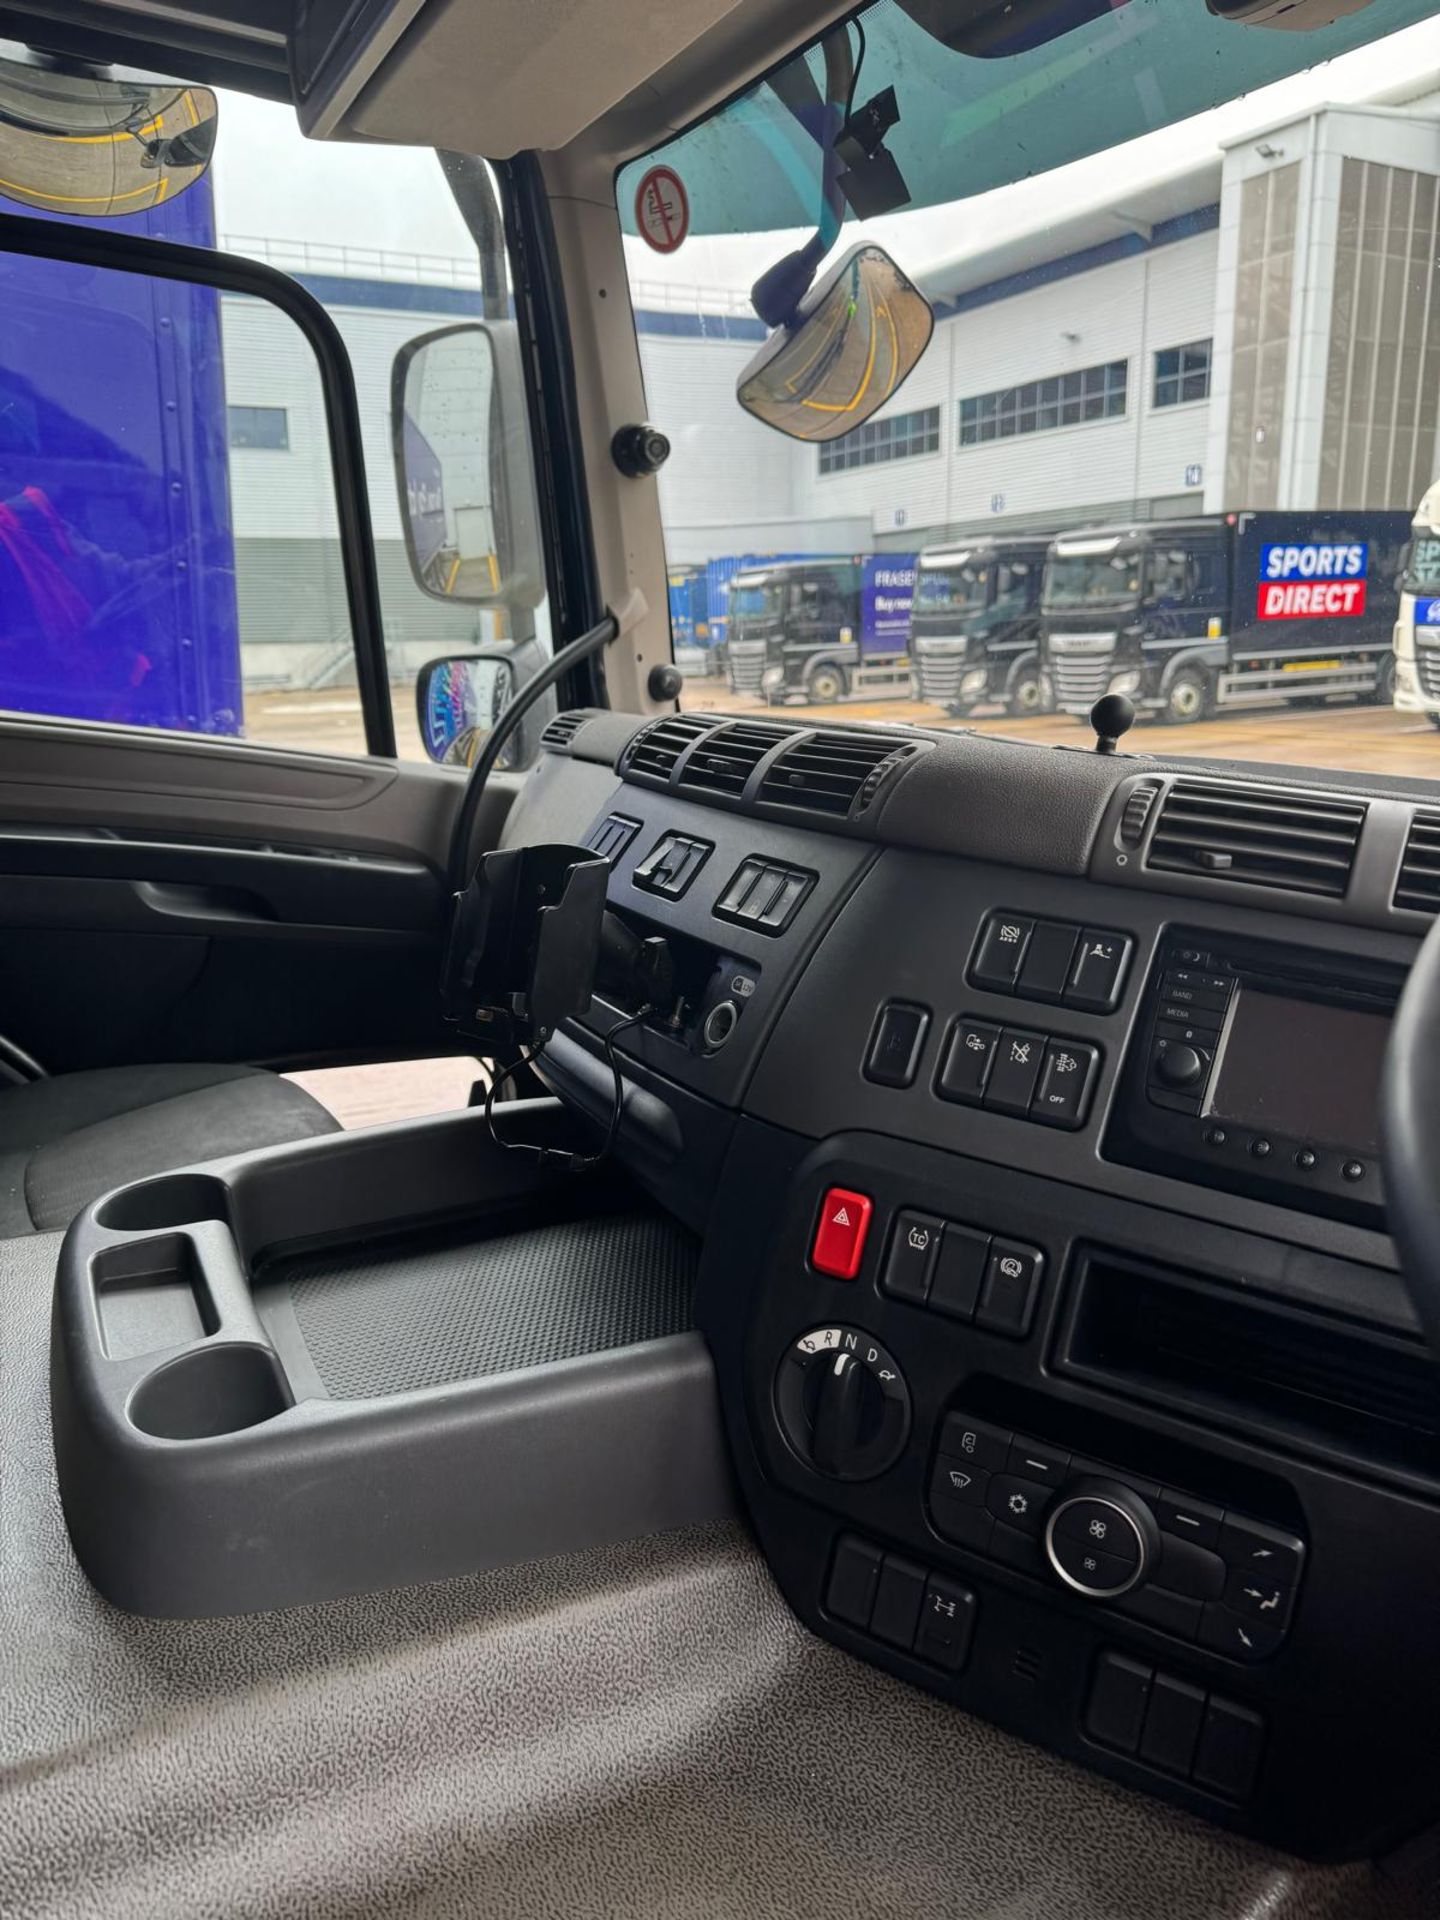 2019, DAF CF 260 FA (Ex-Fleet Owned & Maintained) - FN69 AXH (18 Ton Rigid Truck with Tail Lift) - Bild 10 aus 22